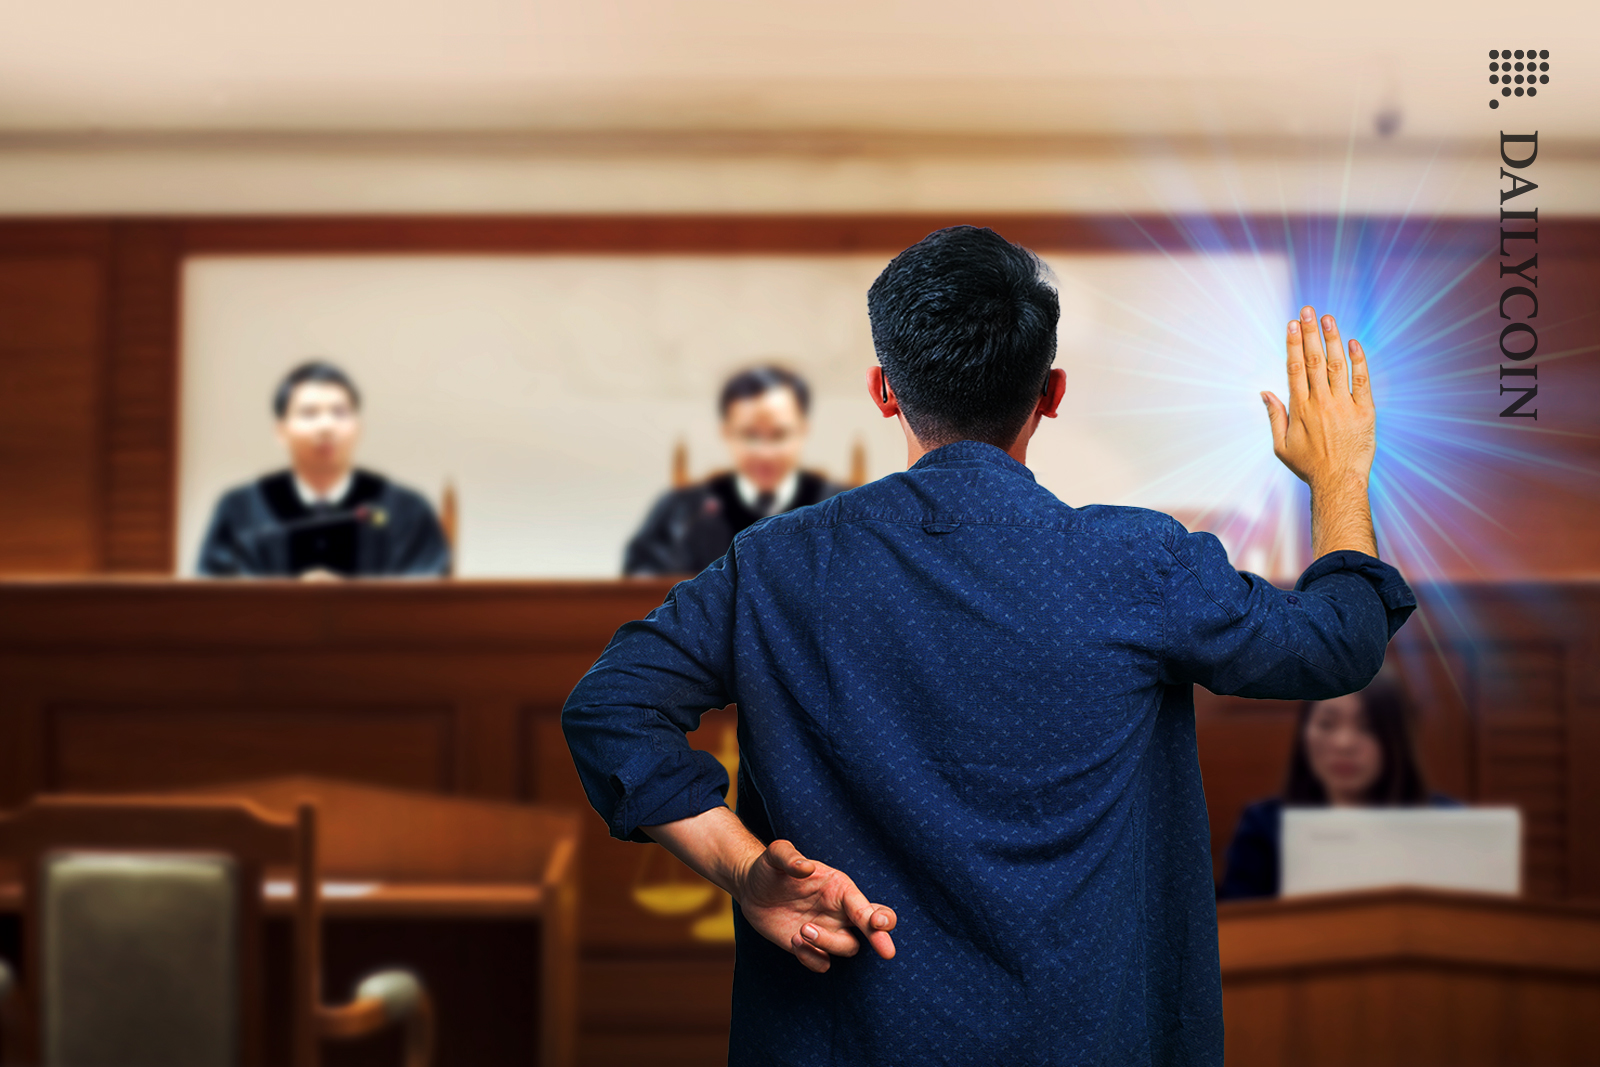 Man's backview in court pleading with one hand up, while the other one holding fingers crossed behind his back.